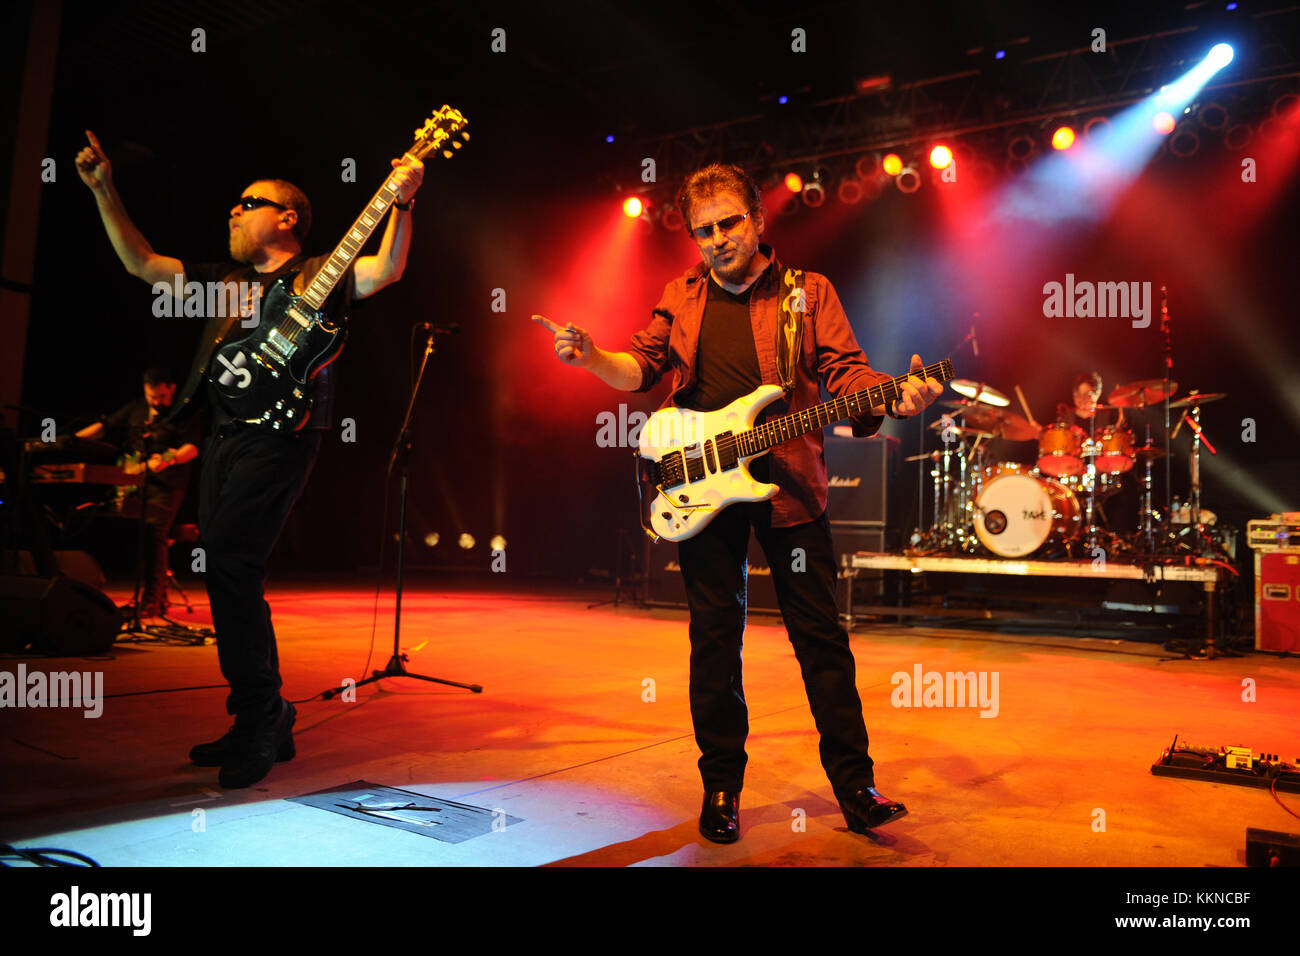 POMPANO BEACH, FL - AUGUST 15: Eric Bloom, Jules Radino and Donald 'Buck Dharma' Roeser of Blue Oyster Cult perform at the Pompano Beach Ampitheatre on August 15, 2015 in Pompano Beach Florida.   People:  Eric Bloom, Jules Radino, Donald Roeser Stock Photo